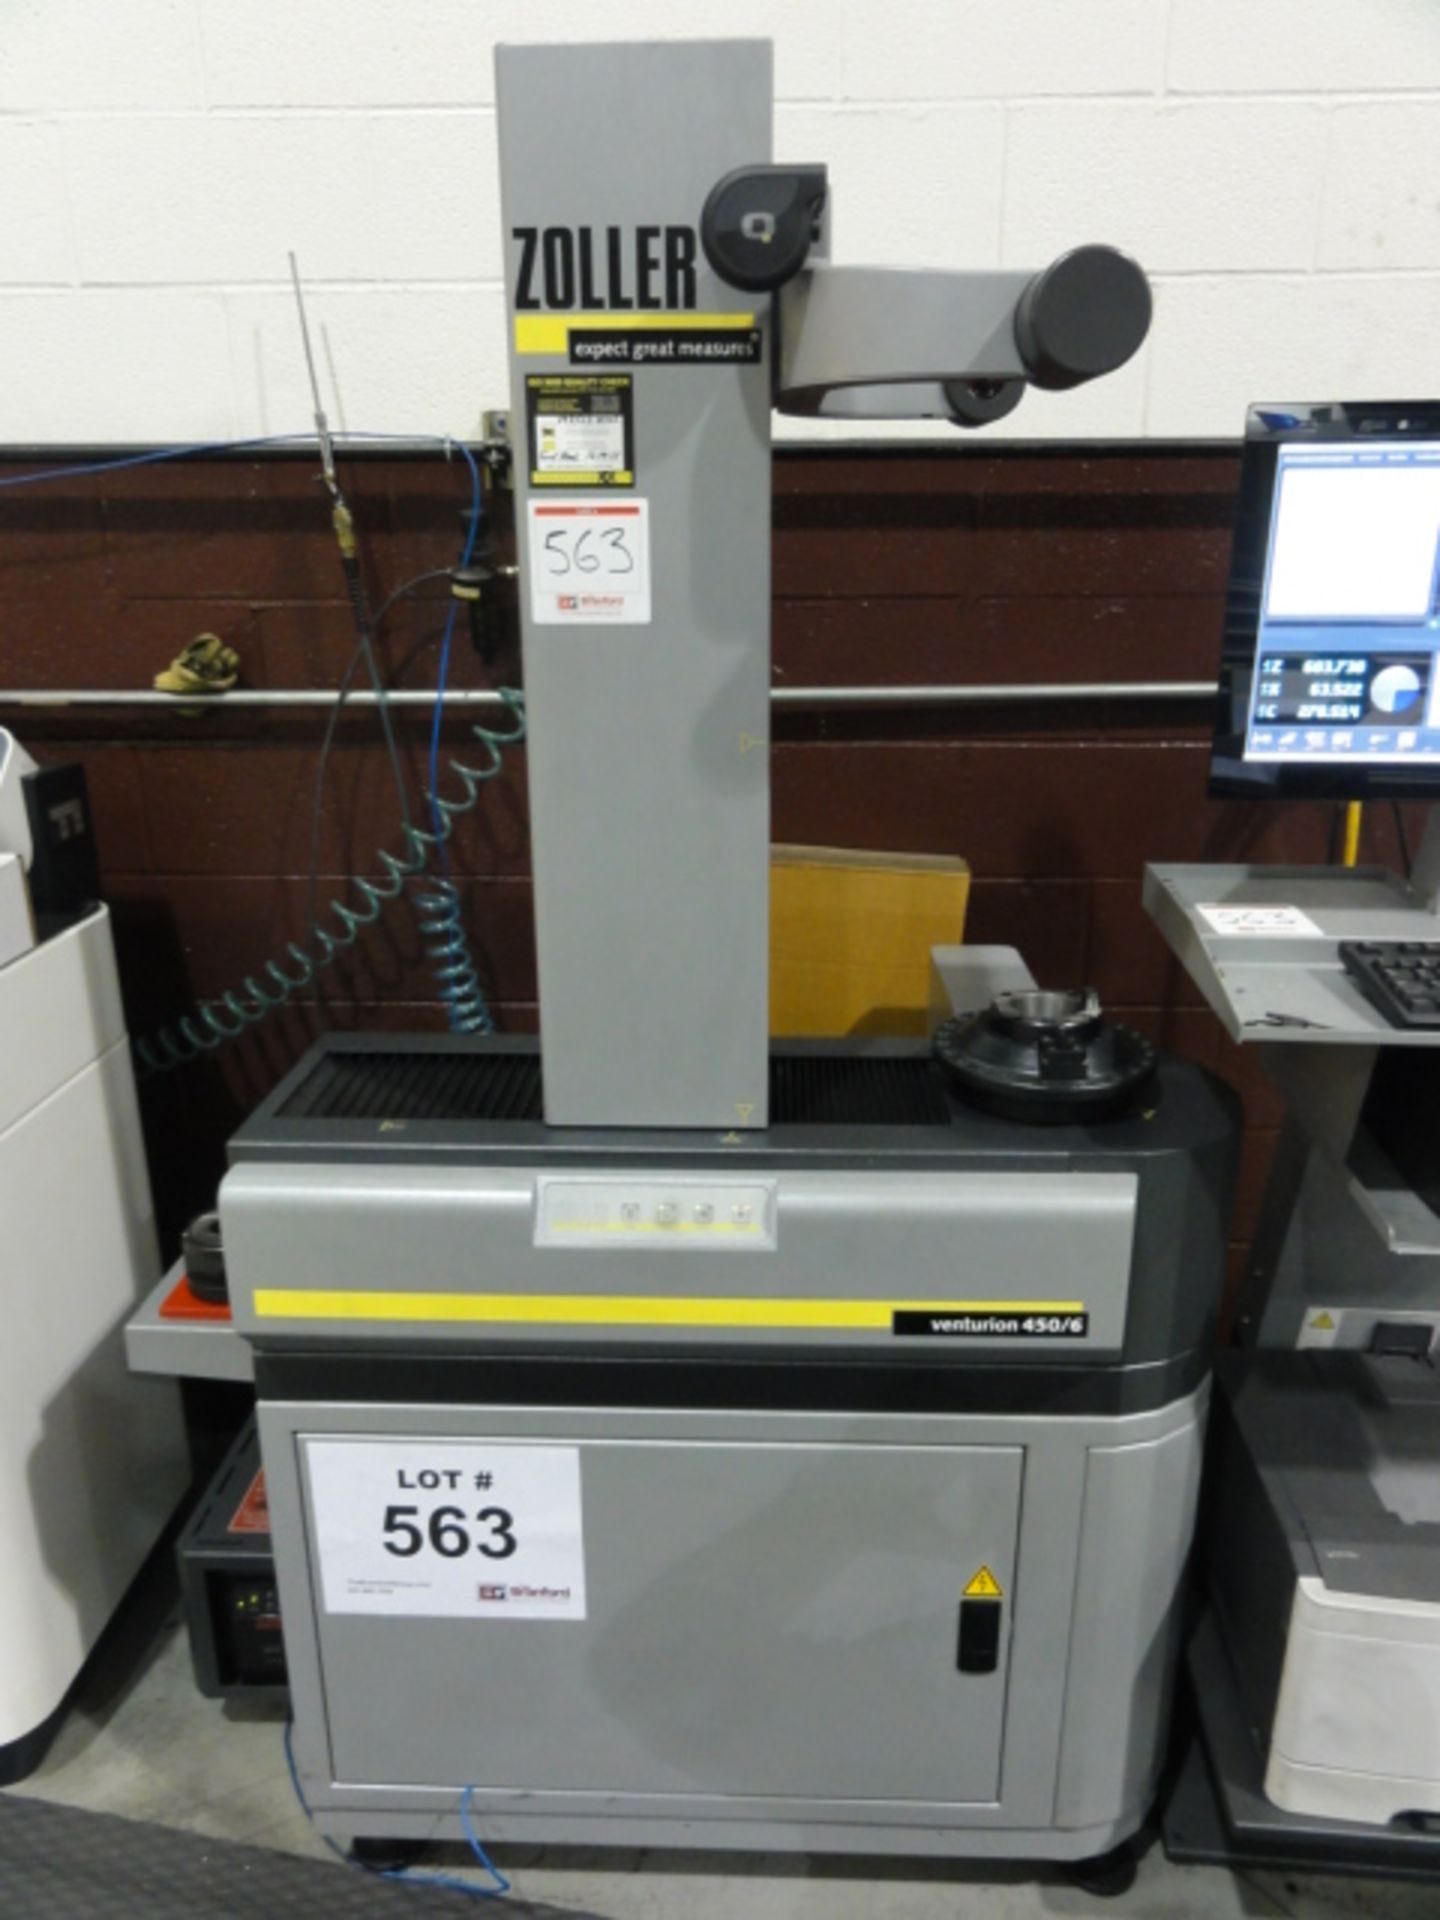 2014 Zoller Venturion 450/6 Tool Presetter, w/ Image Processing Camera w/ LED Ring Light, Tool - Image 2 of 9